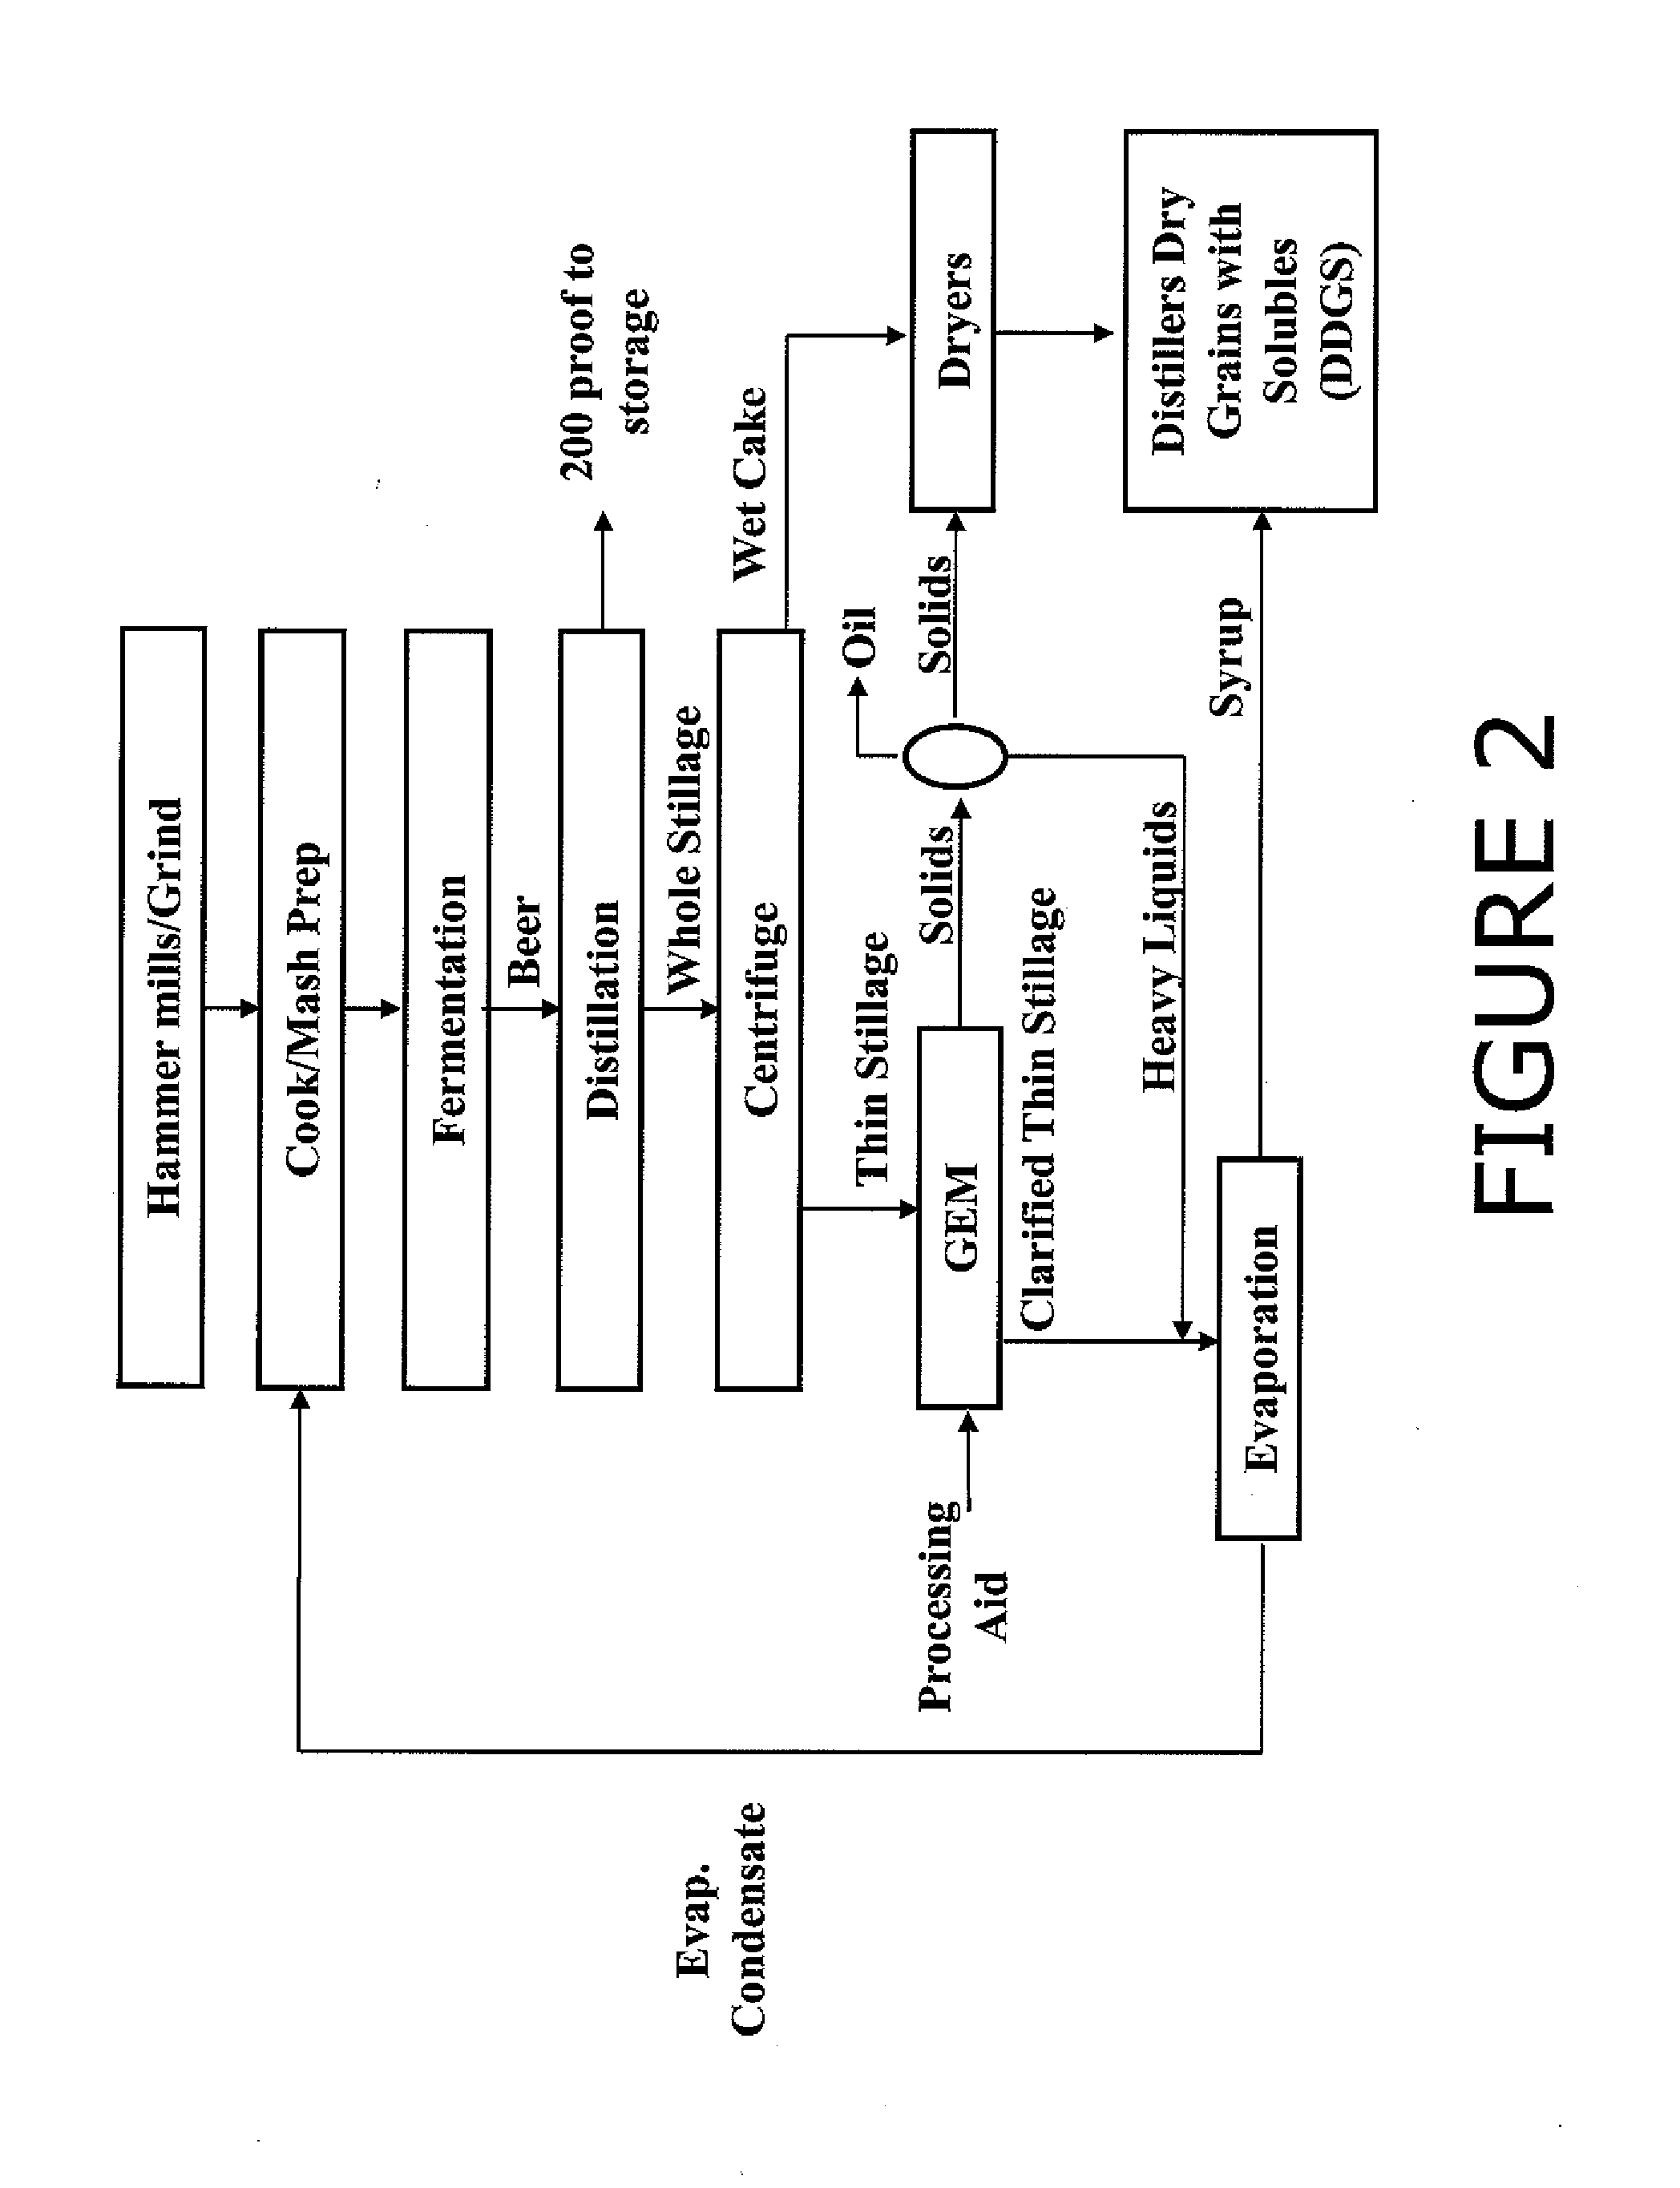 Method for conditioning and processing whole or thin stillage to aid in the separation of and recover protien and oil fractions